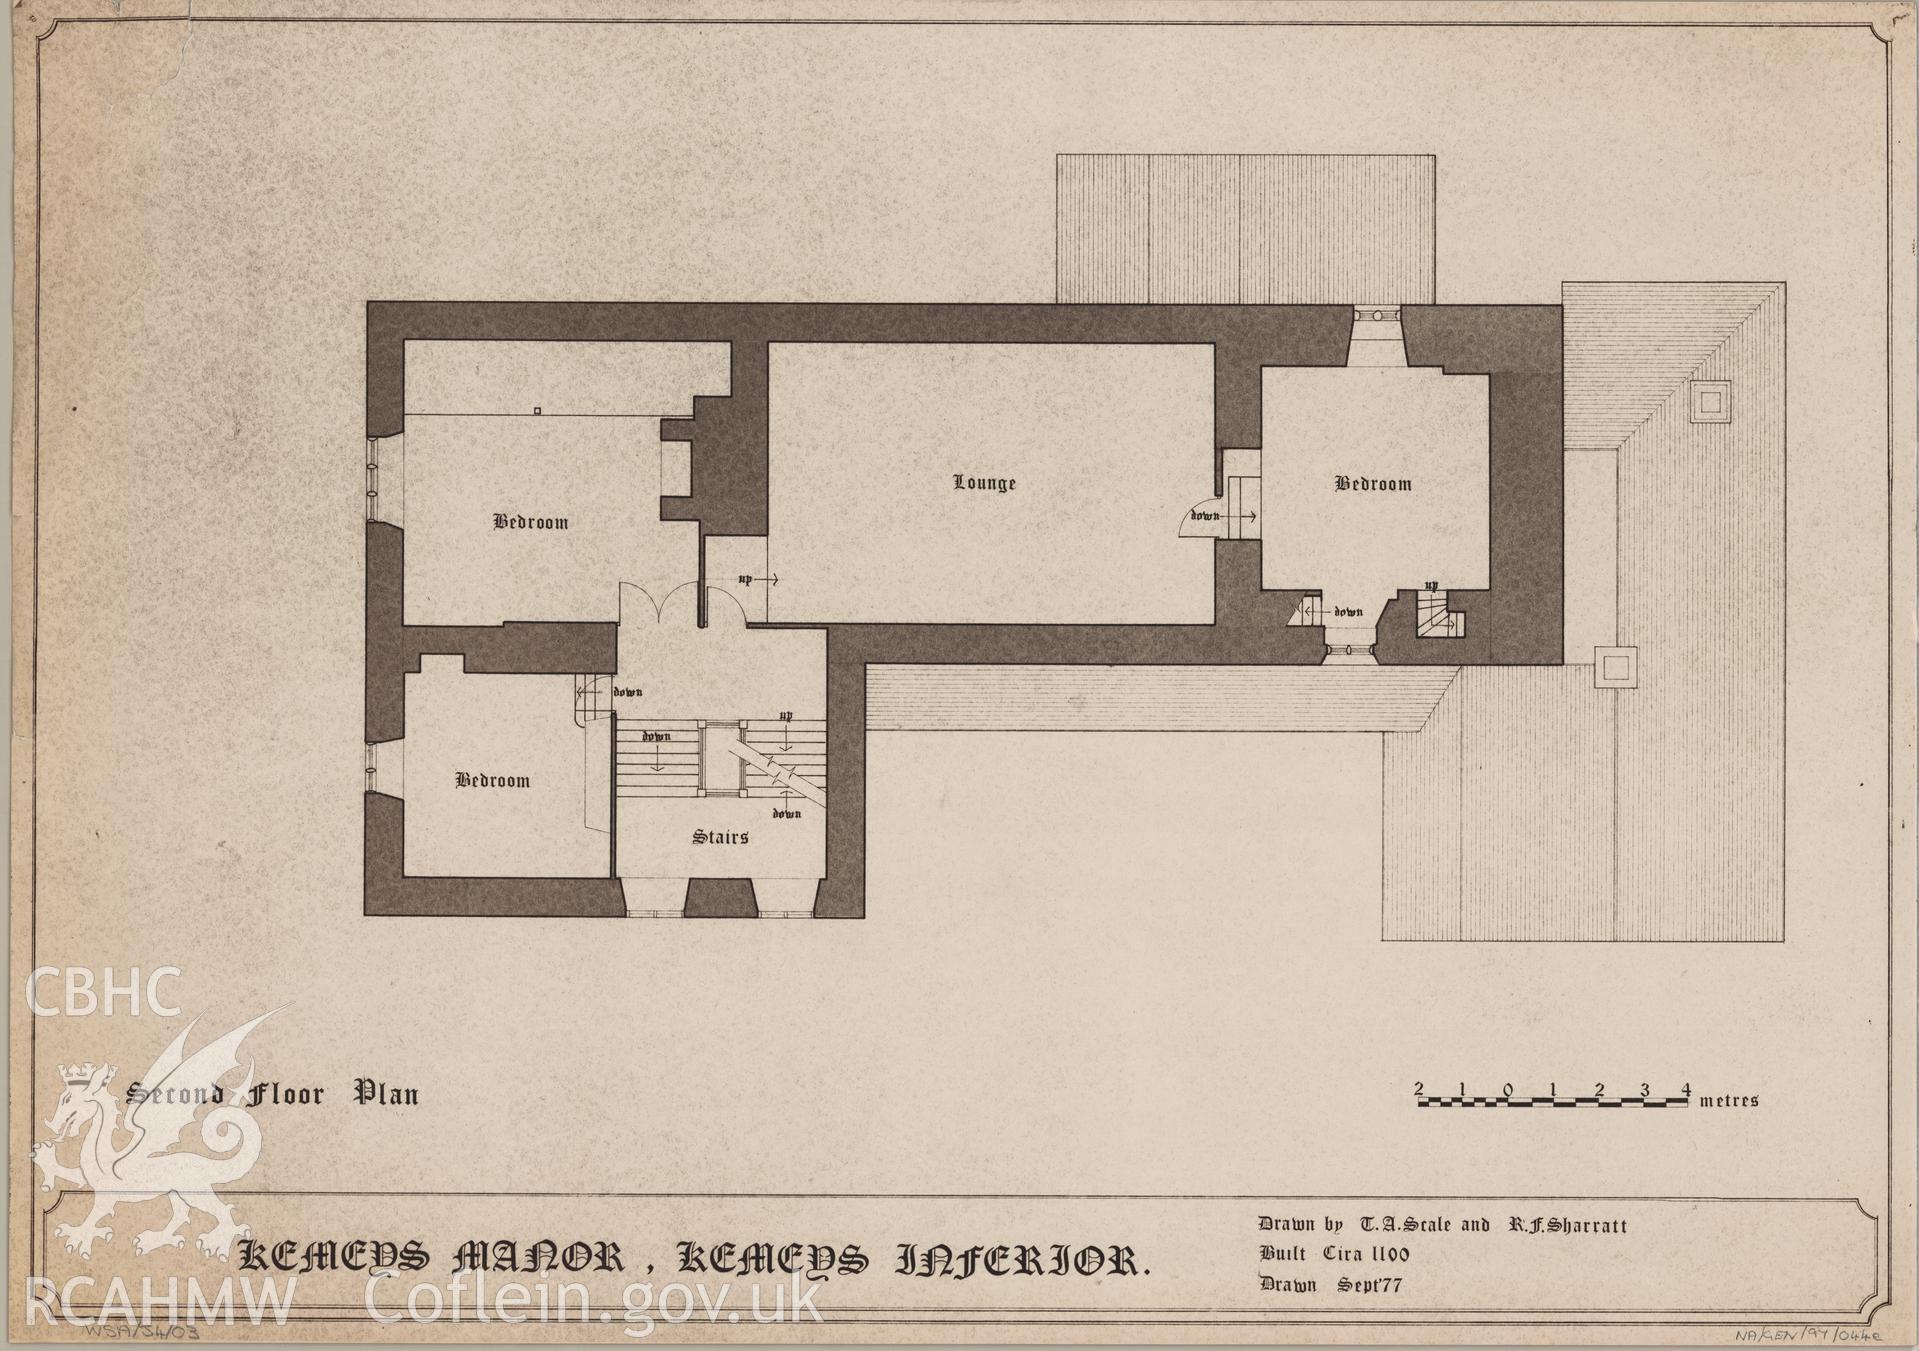 Measured drawing showing second floor plan of Kemey's Manor, Kemeys Inferior, produced by T.A. Scale and R.F. Sharratt, September1977.